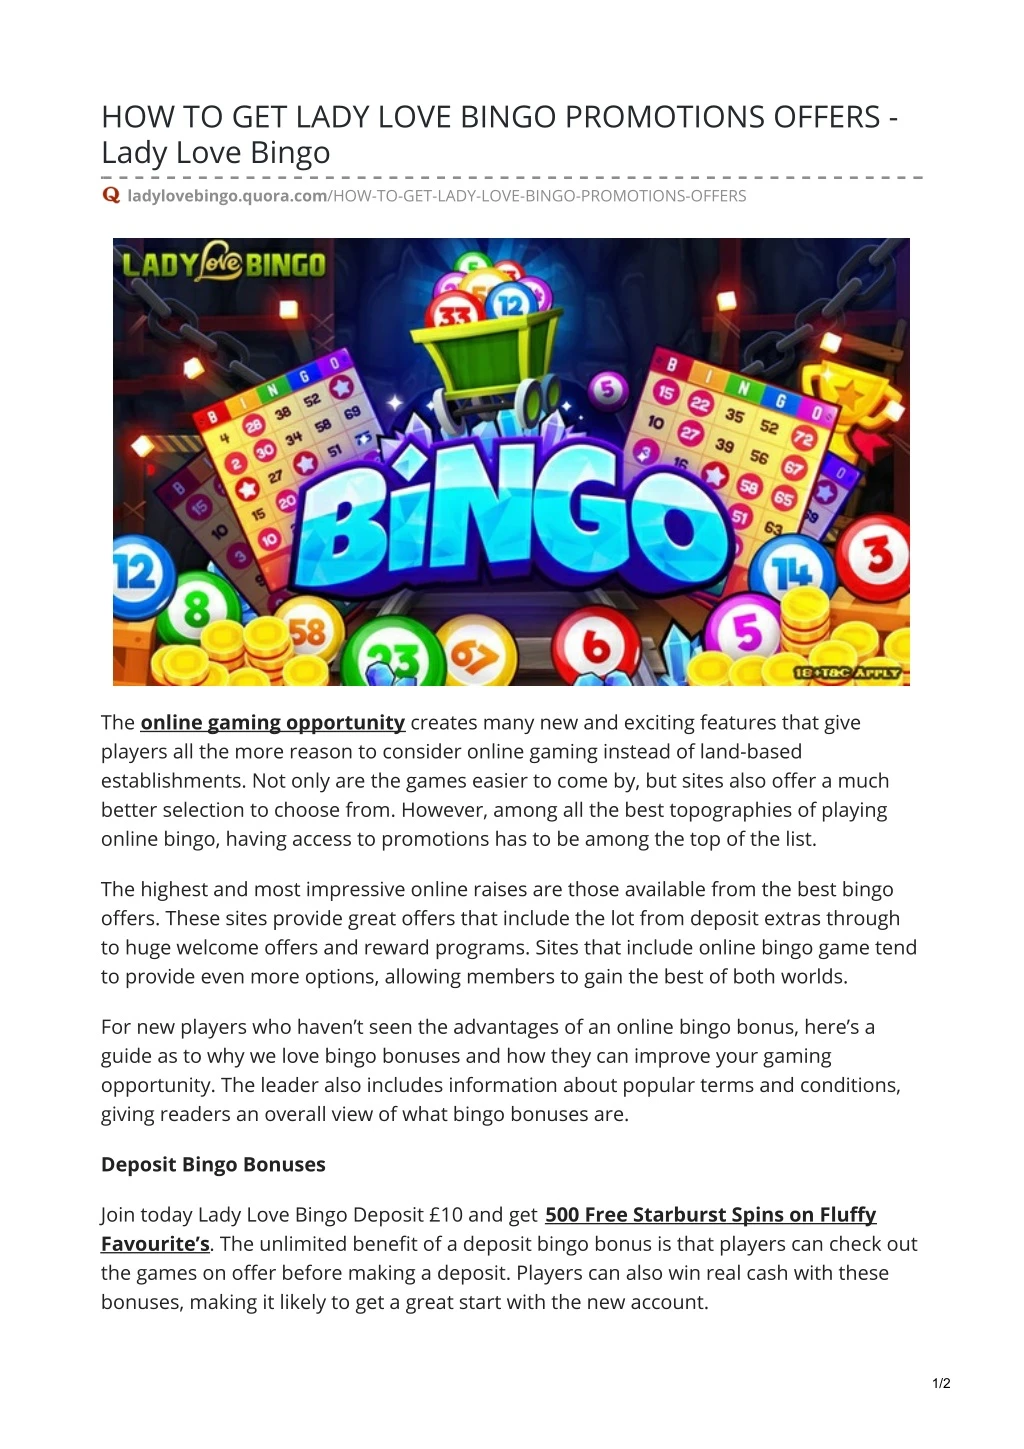 how to get lady love bingo promotions offers lady n.